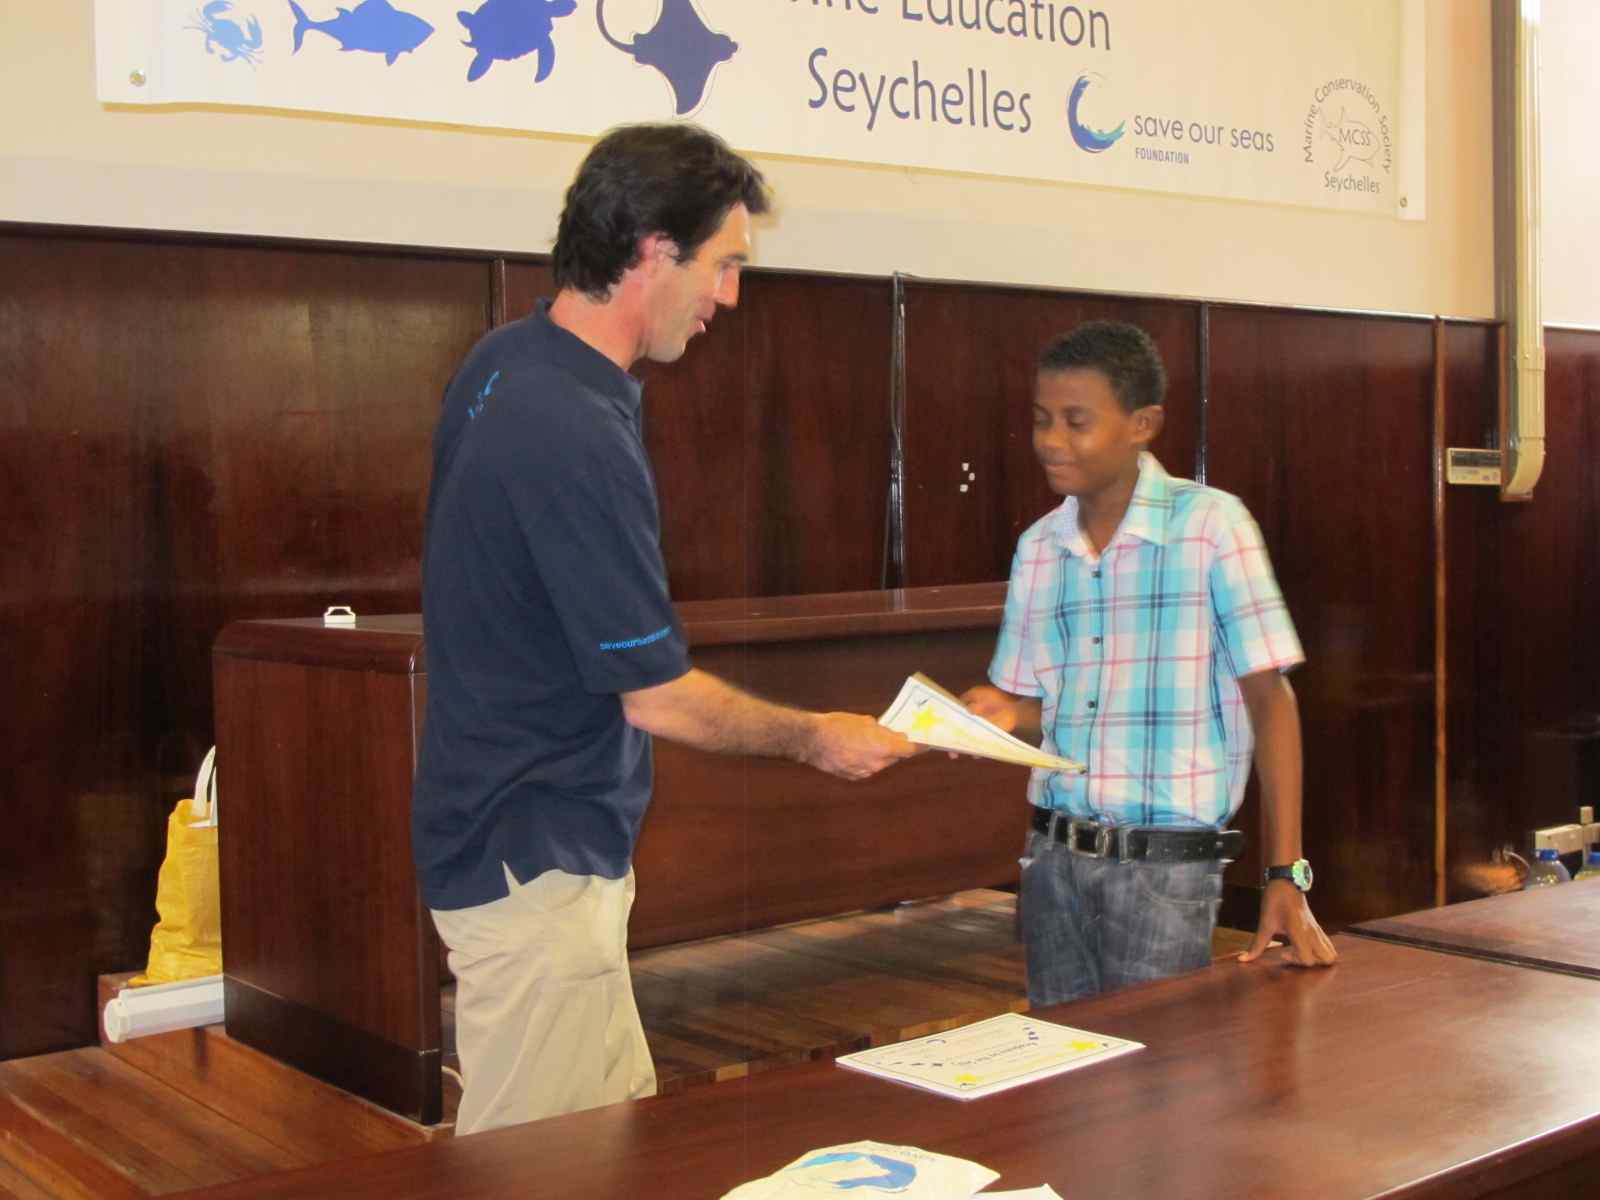 Save Our Seas Educator Paul Millar from South Africa hands out a bursary certificate